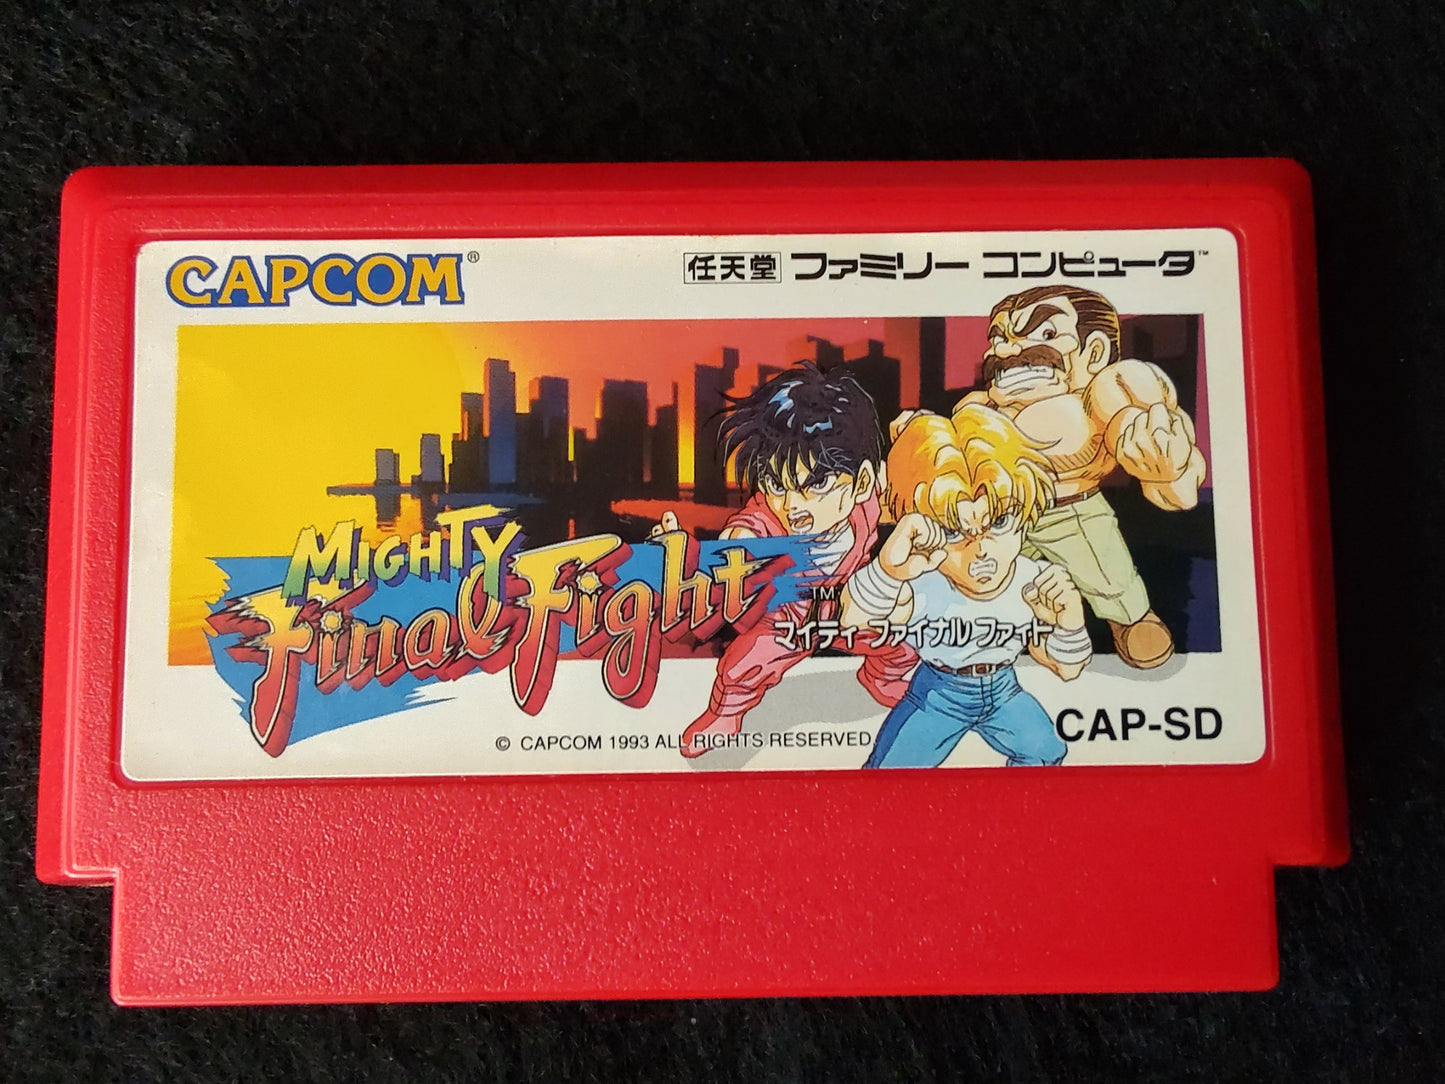 Mighty Final Fight Nintendo Famicom NES Cartridge,Manual Boxed set tested-g0130-